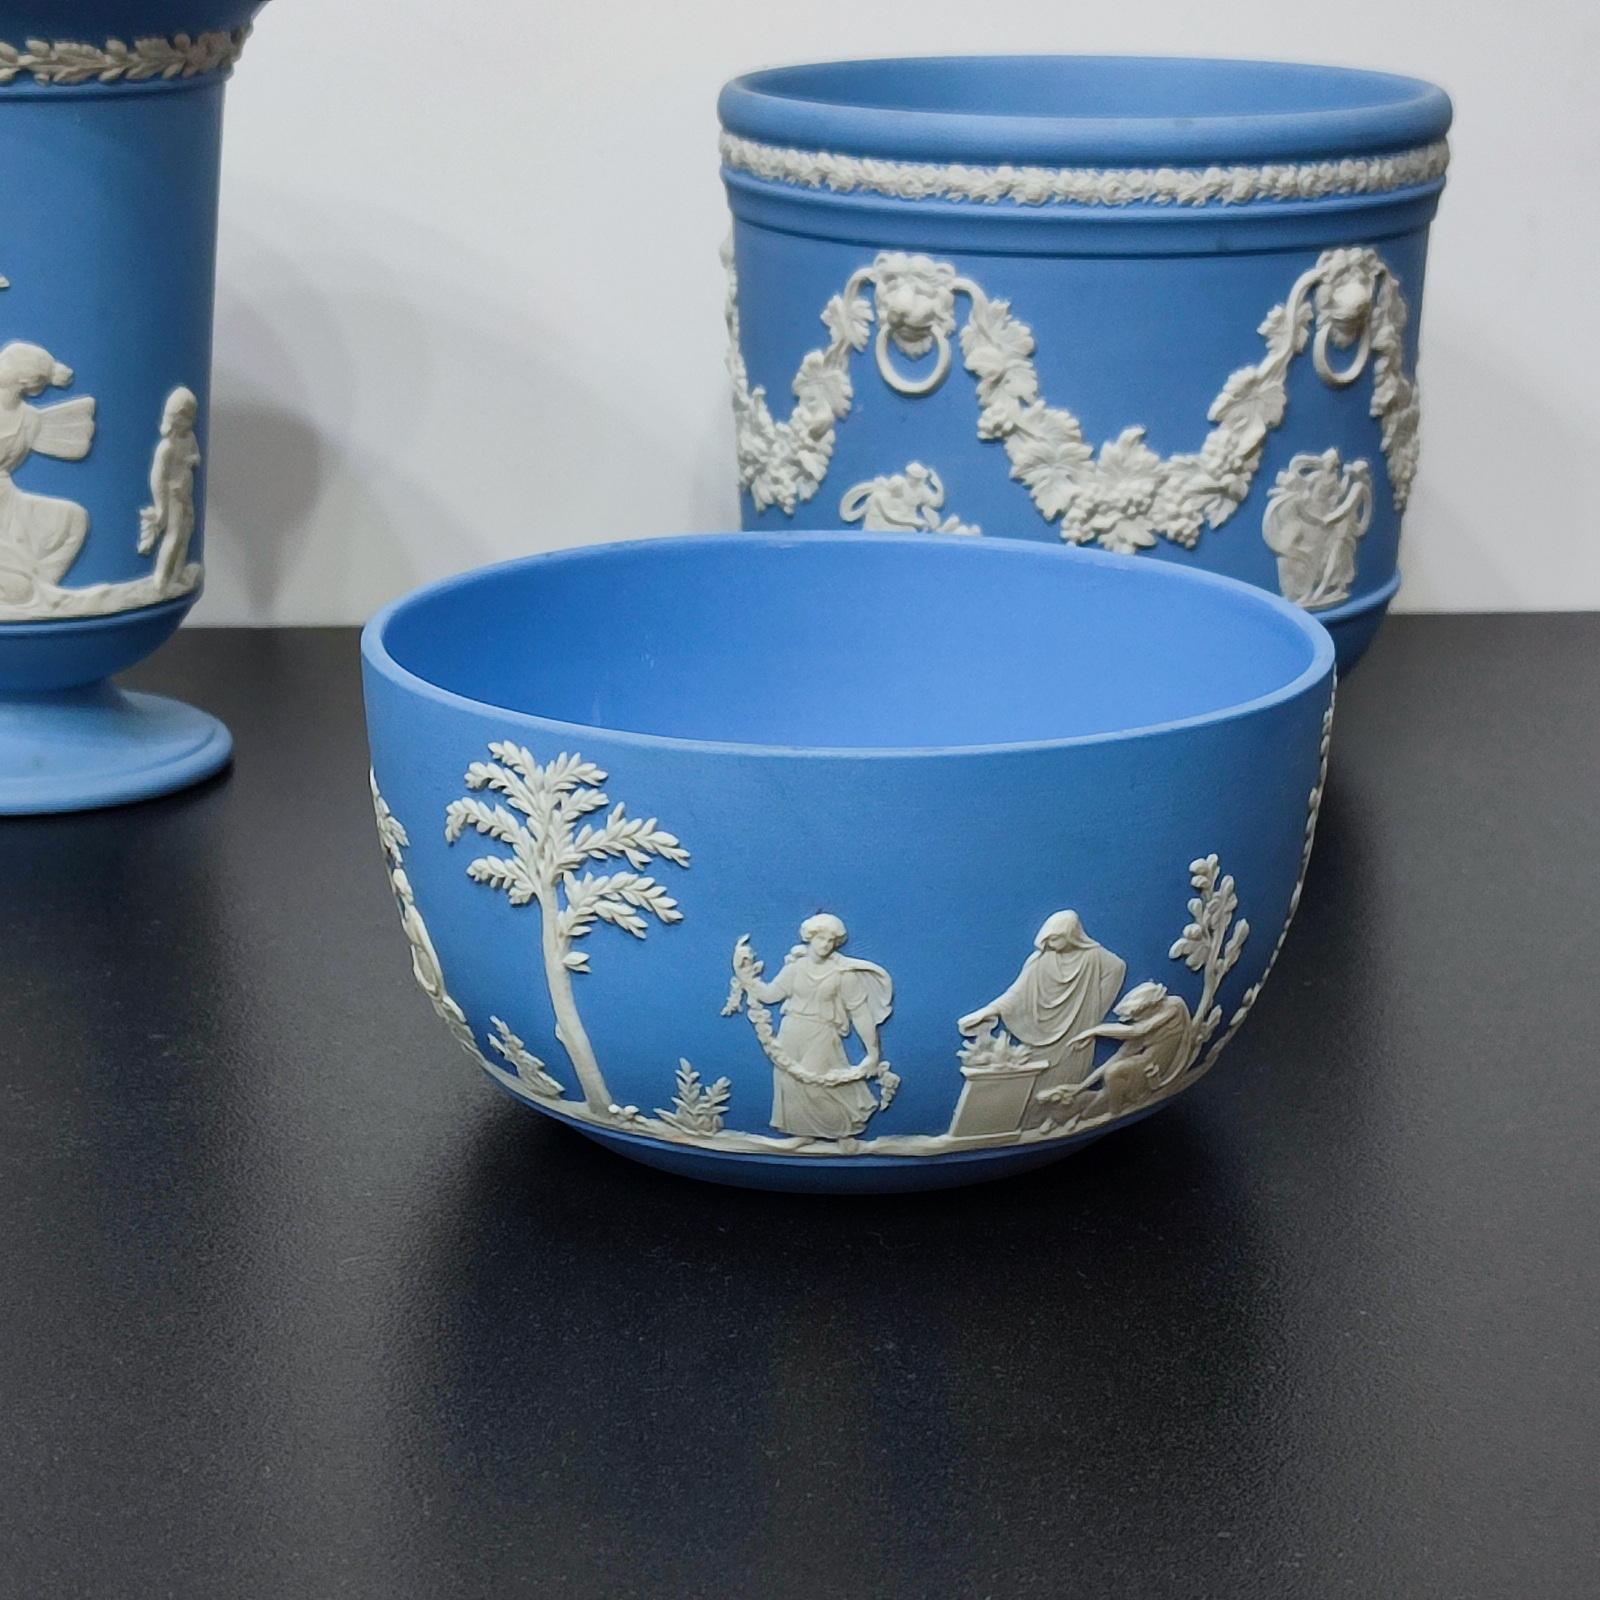 Wedgwood Blue Jasper Ware Vessels Classical Scenes, Collection of 3, FREESHIP For Sale 3